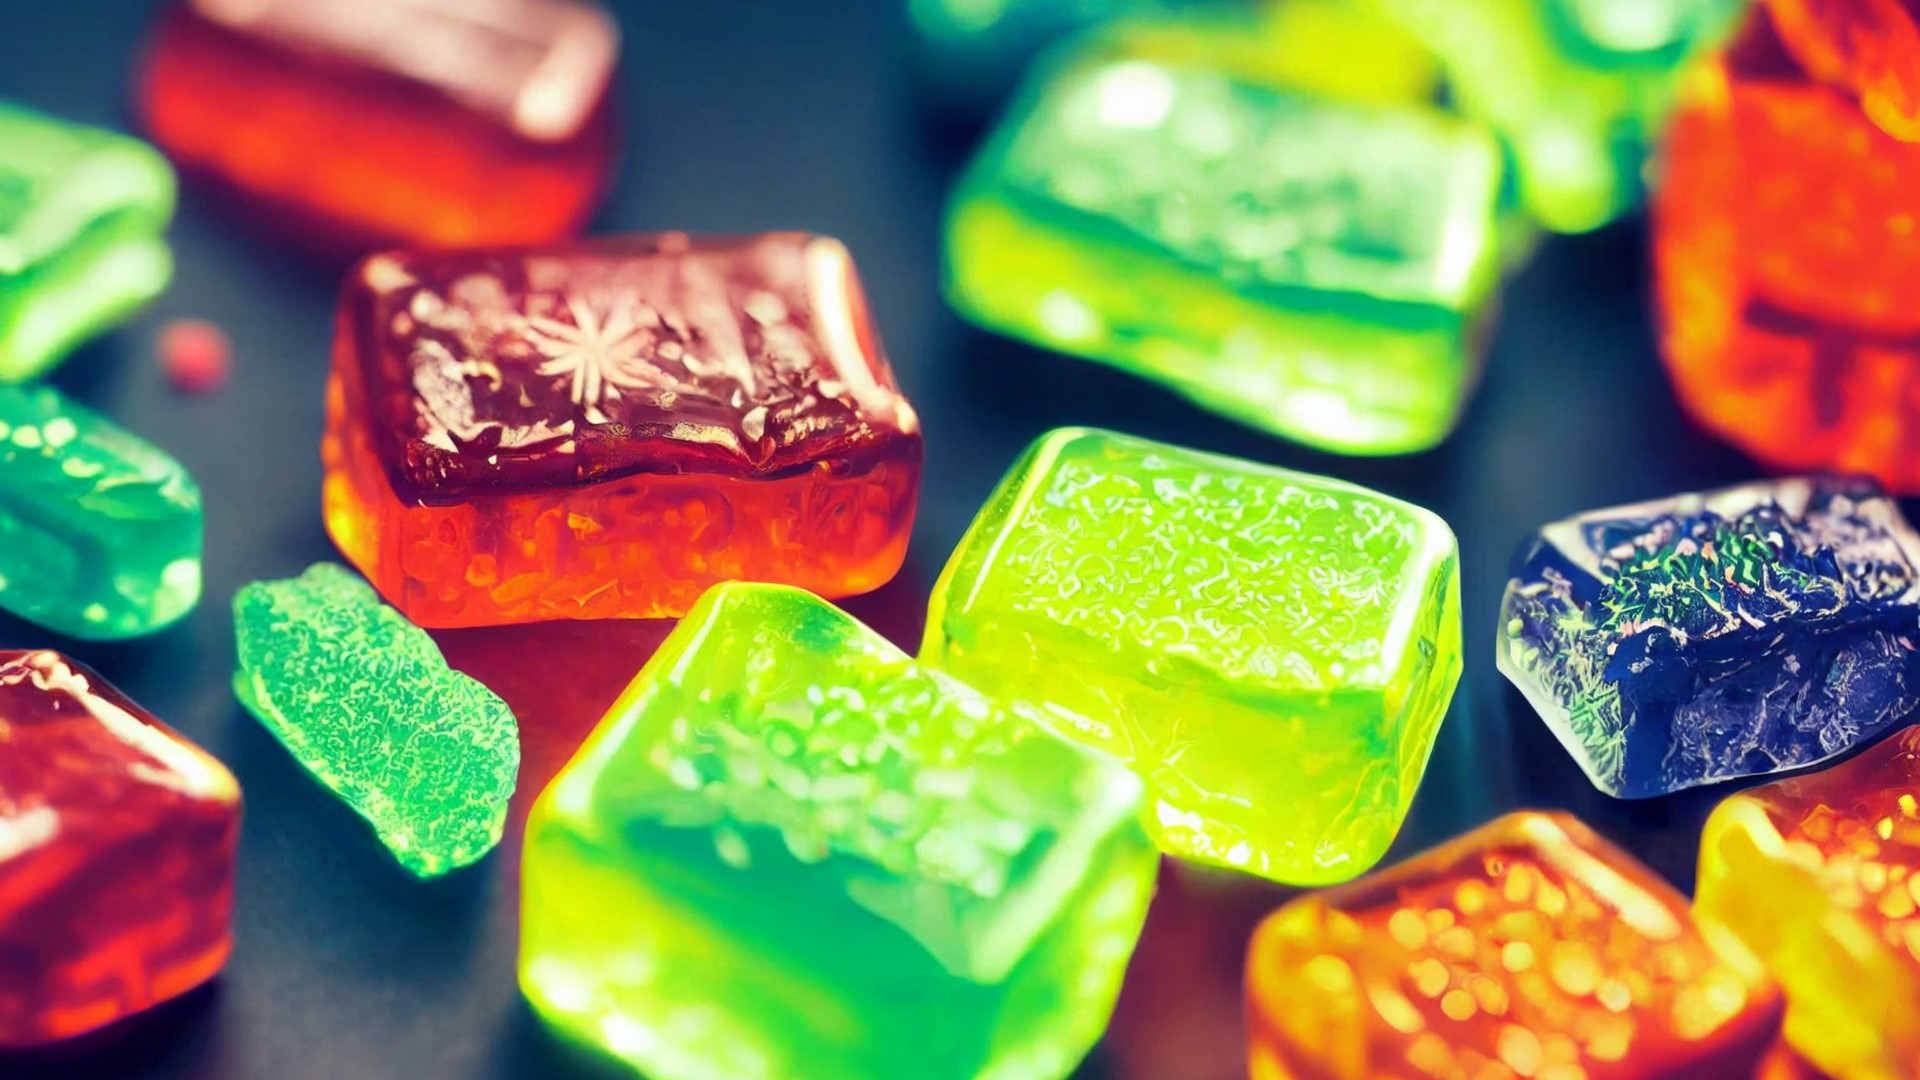 School officials said the student who brought the gummies will be "disciplined according to the Student Support and Behavior Intervention Handbook."